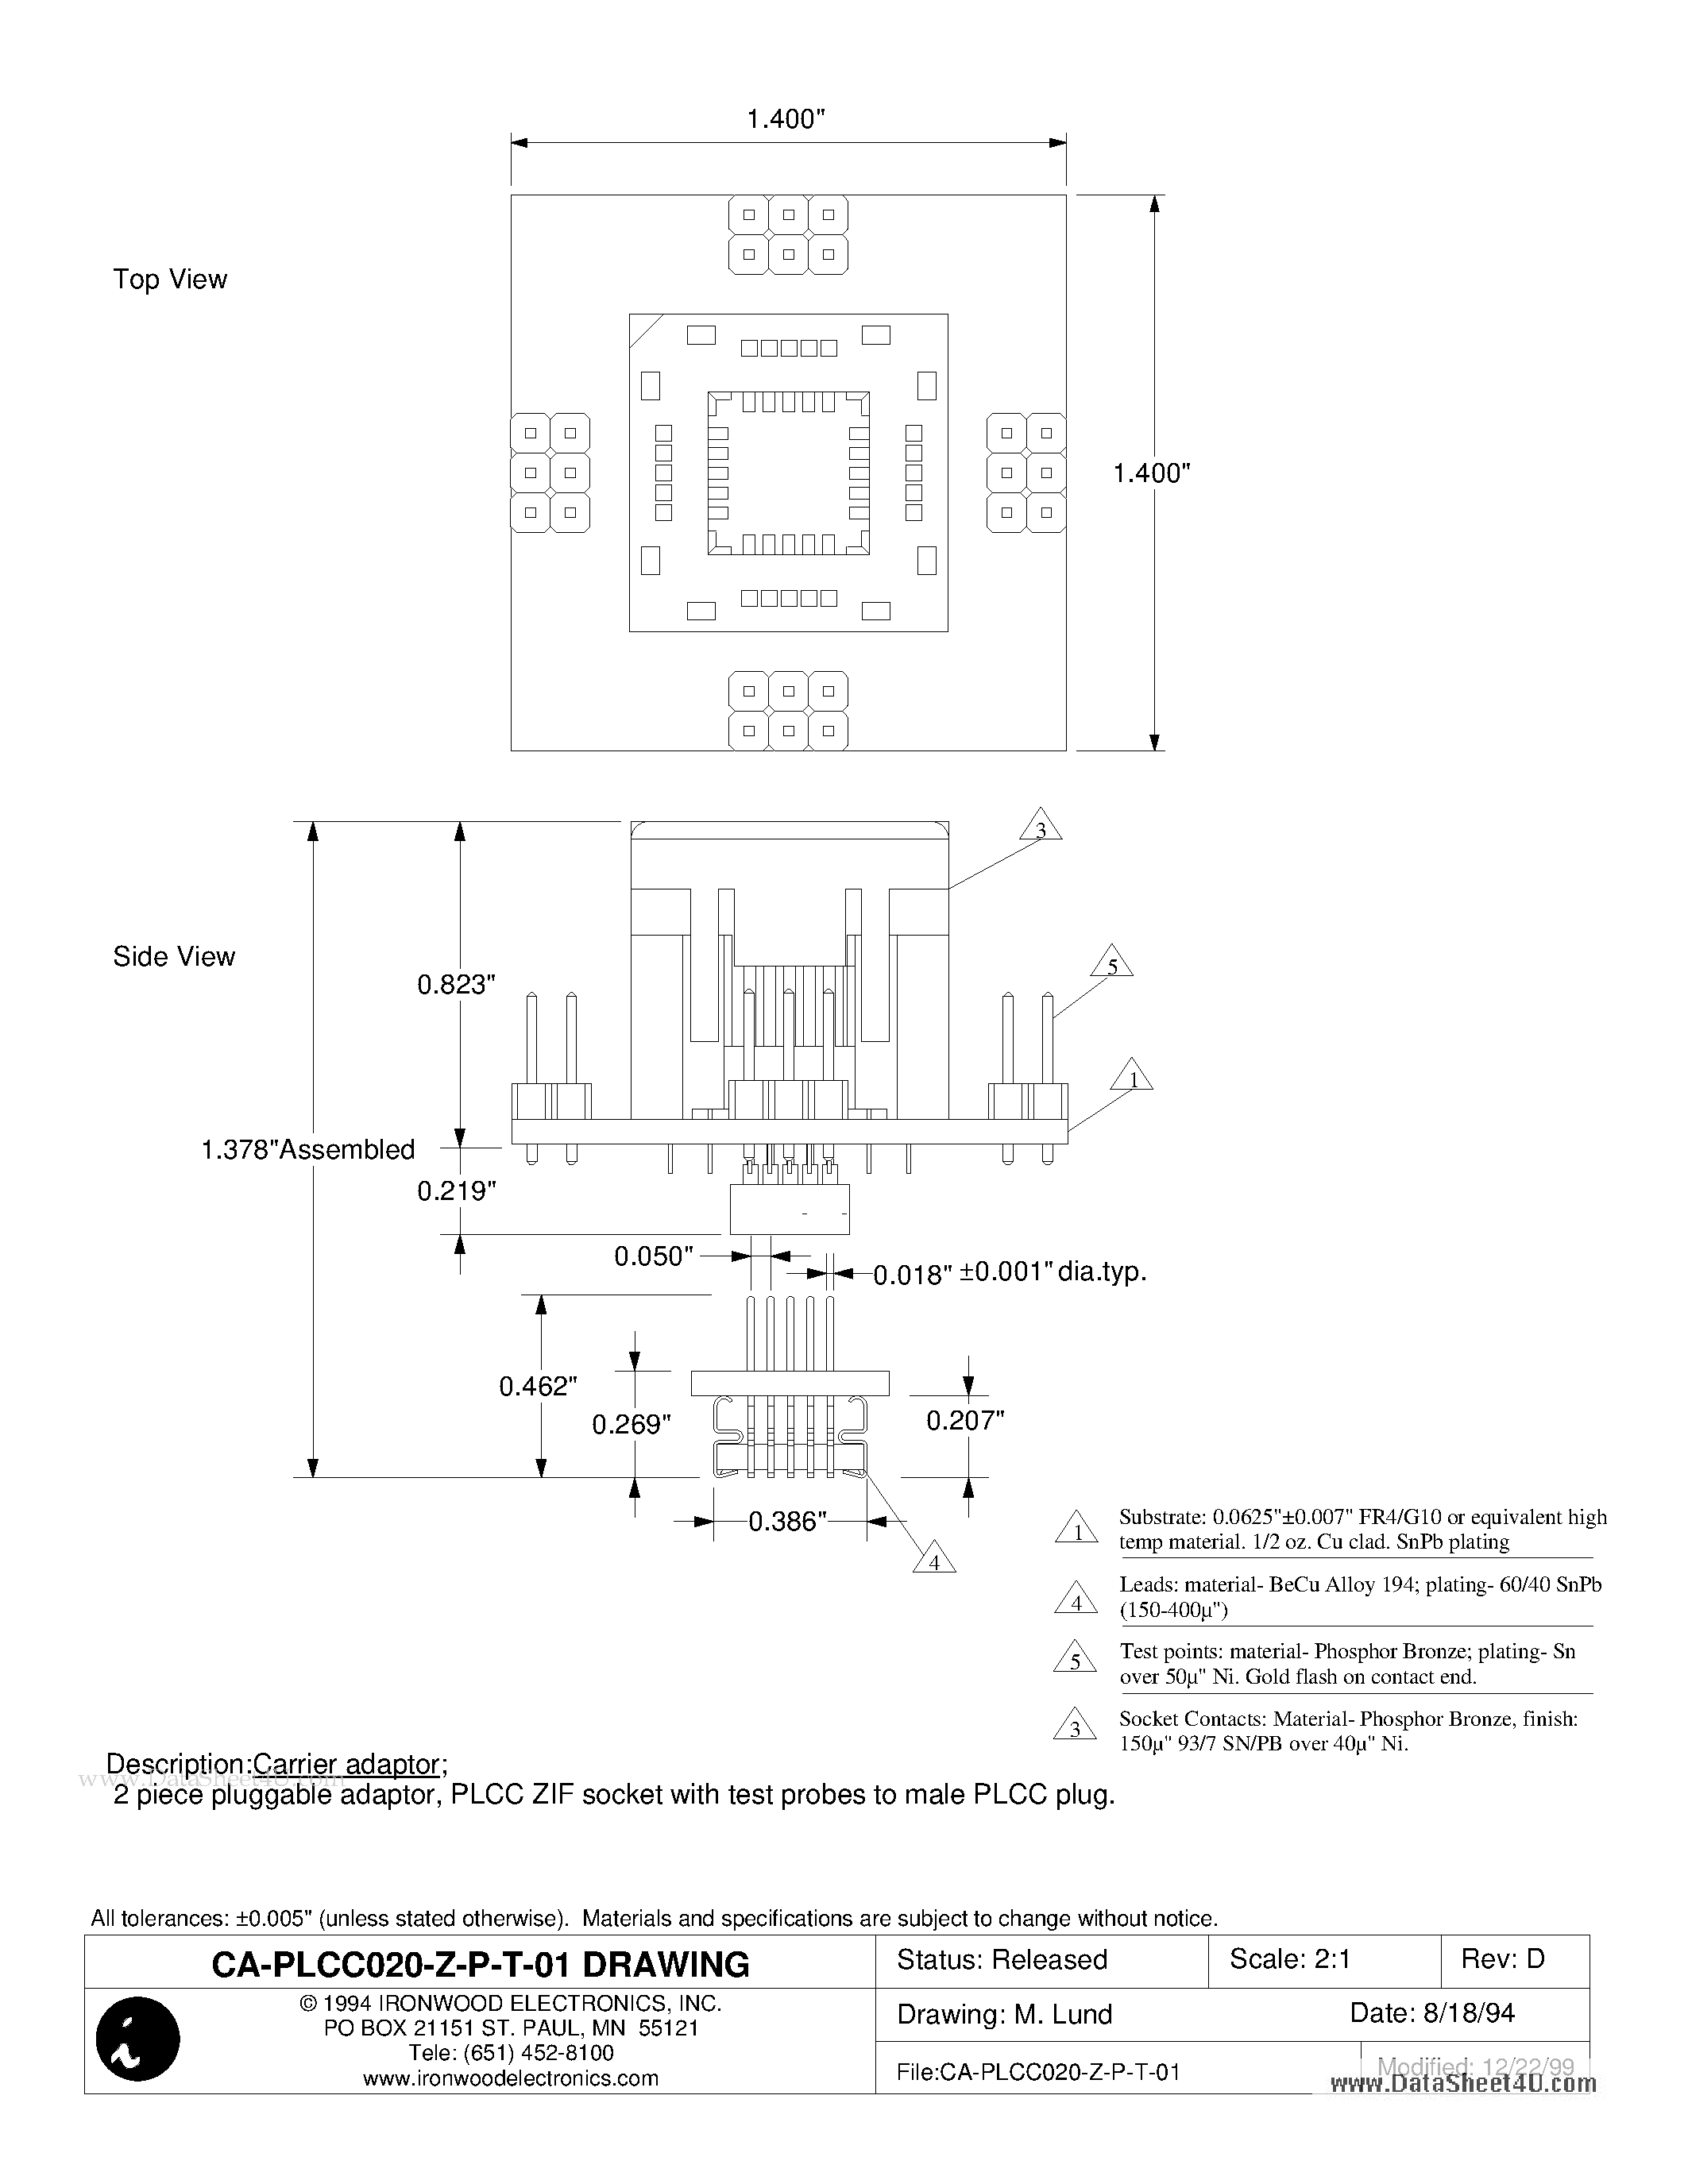 Datasheet CA-PLCC020-Z-P-T-01 - Carrier adaptor page 1